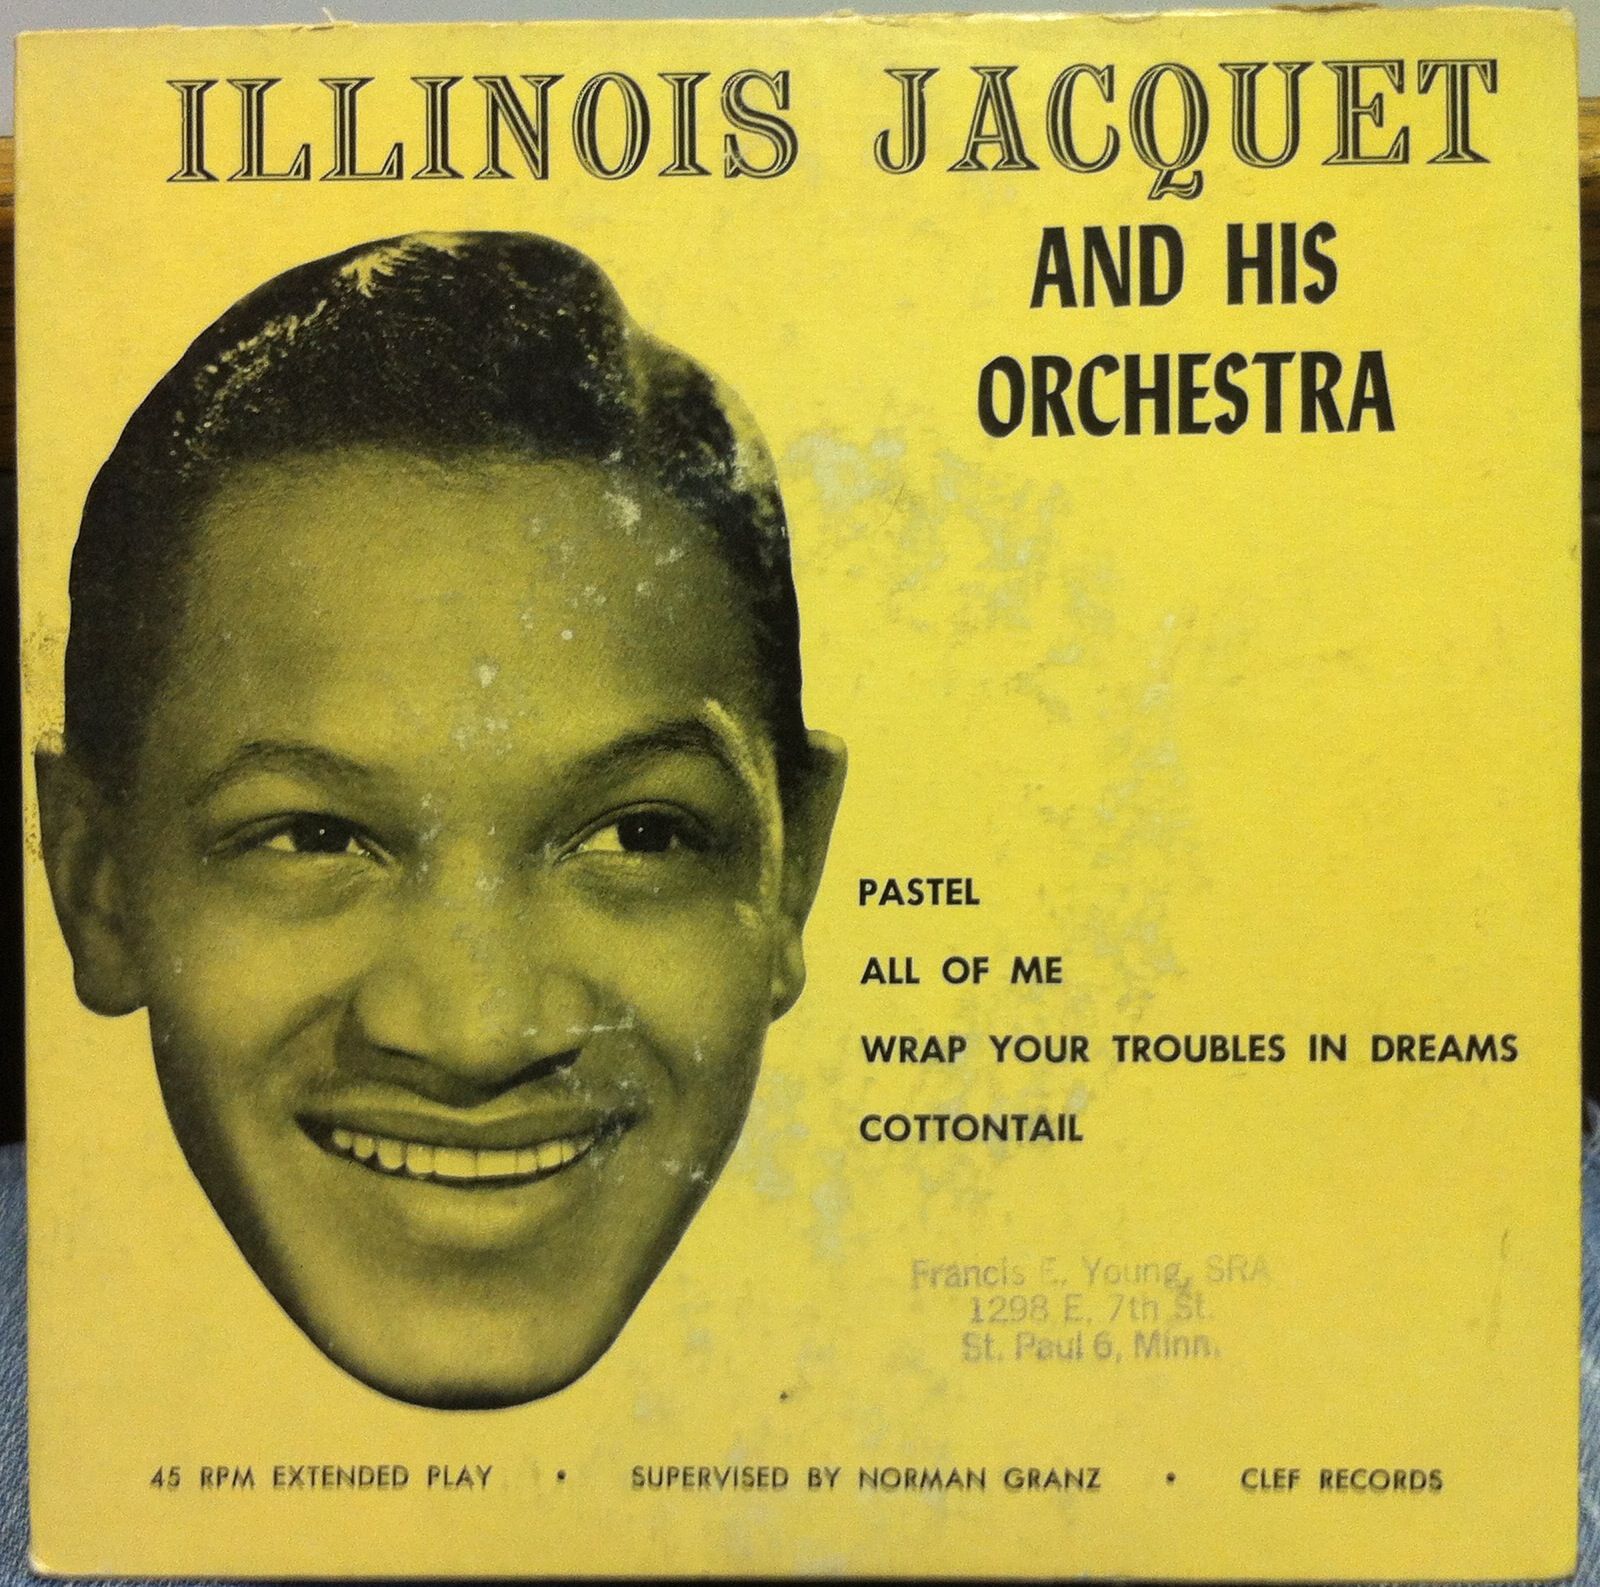   JACQUET & his orchestra 7 VG+ EP 126 Clef Rare w/ Carl Perkins Record